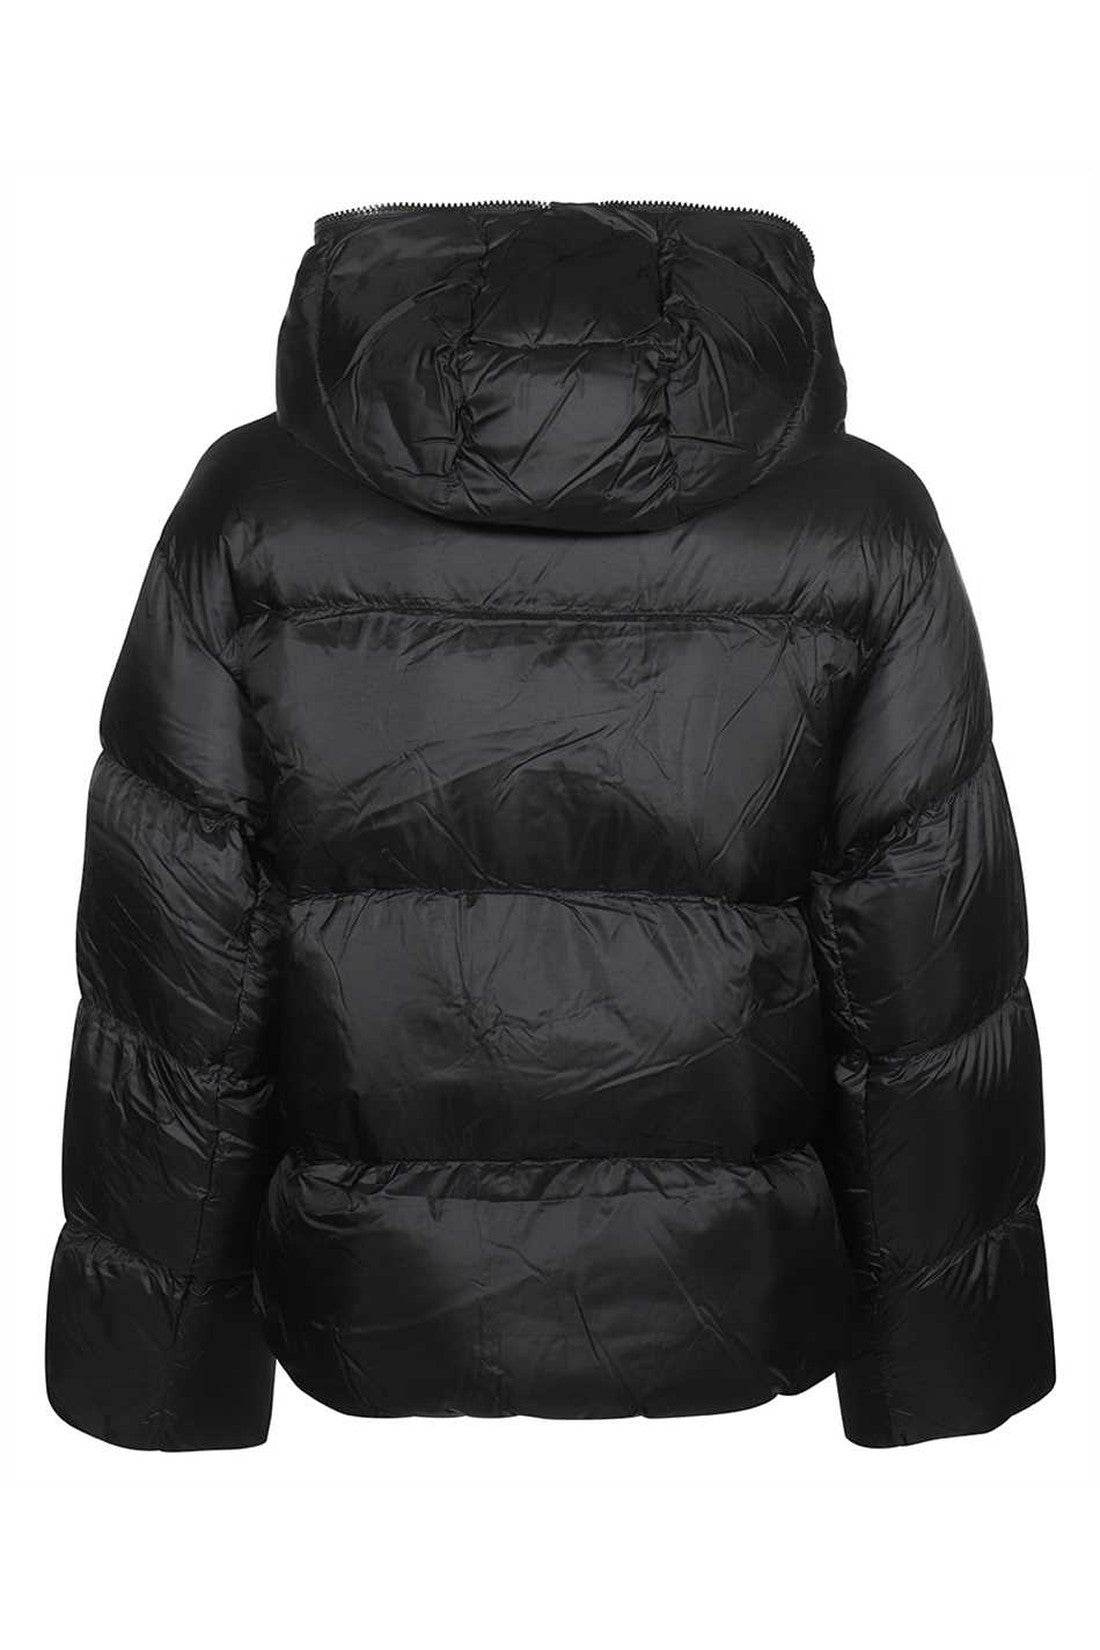 Duvetica-OUTLET-SALE-Hooded-full-zip-down-jacket-Jacken-Mantel-ARCHIVE-COLLECTION-2.jpg